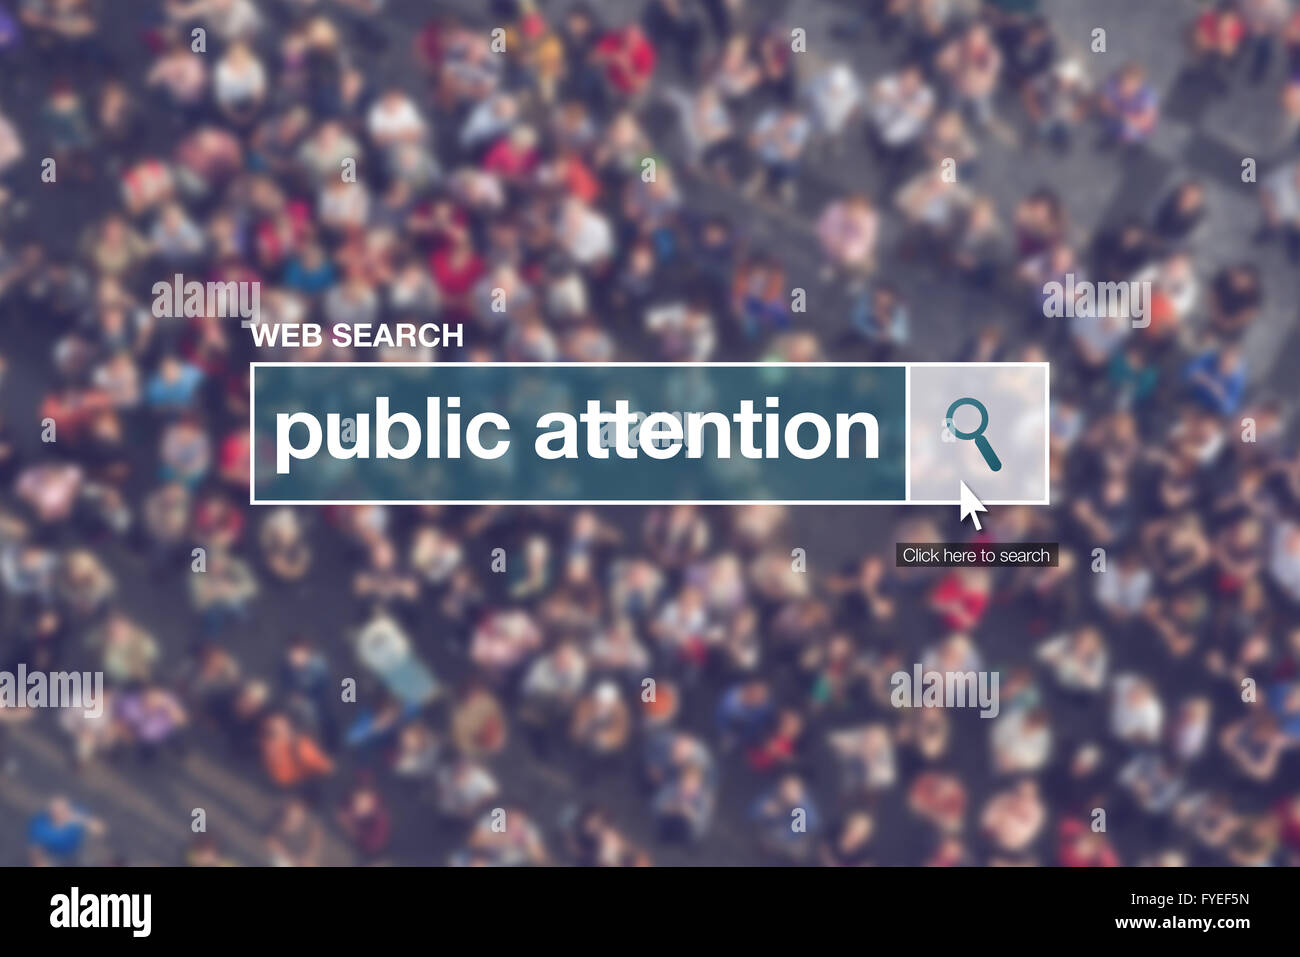 Web search bar glossary term - public attention definition in internet glossary. Stock Photo